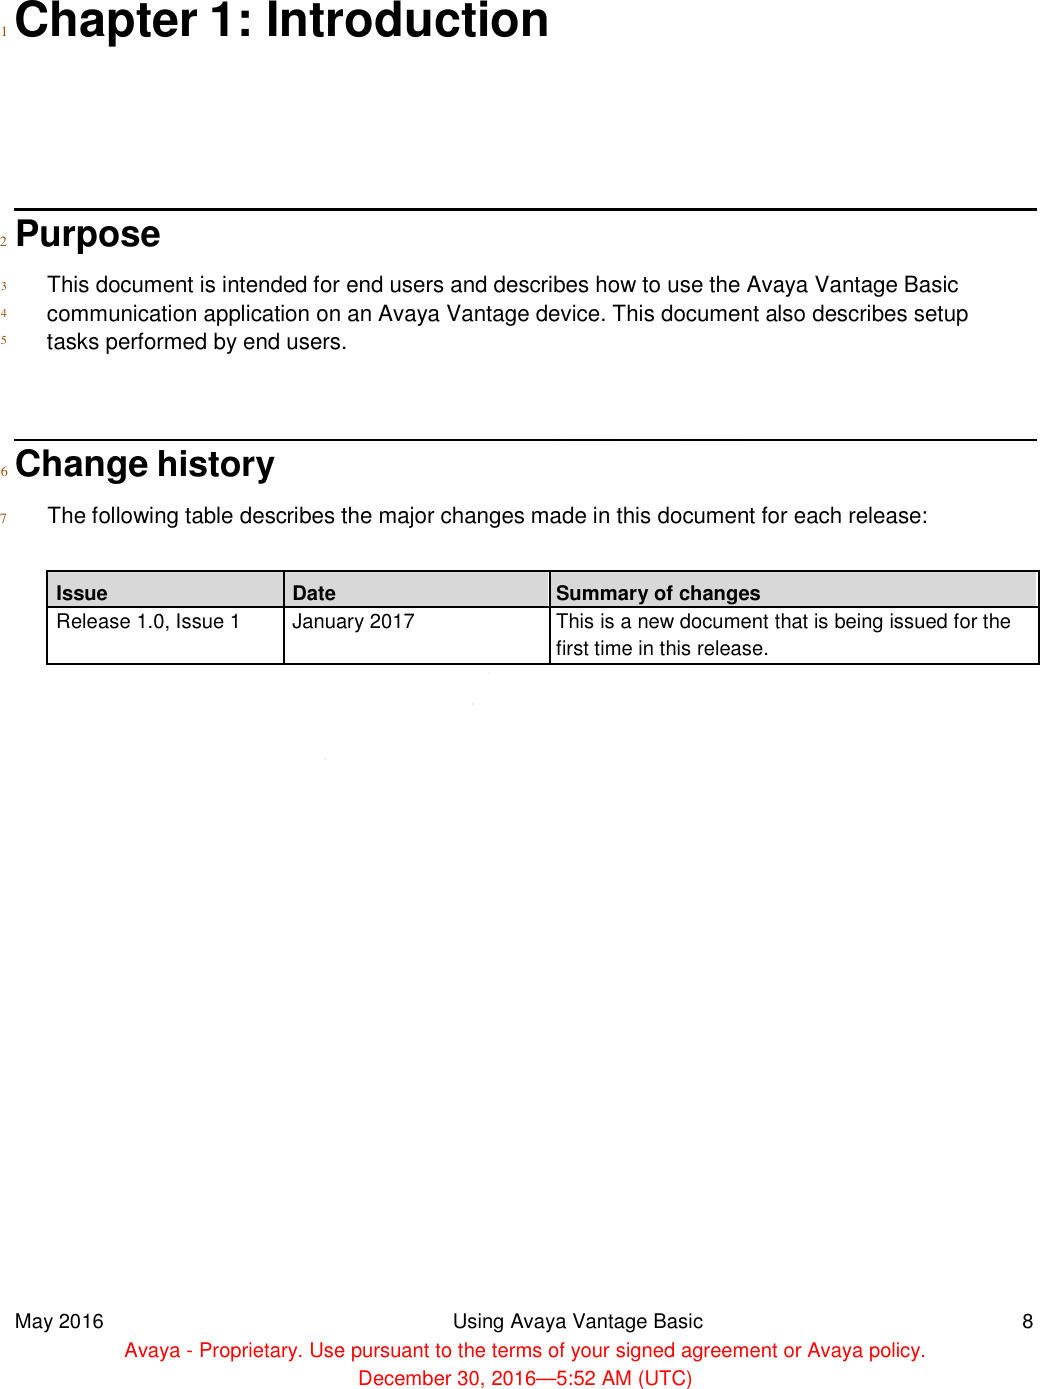   1  Chapter 1: Introduction        2 Purpose  3  4  5   This document is intended for end users and describes how to use the Avaya Vantage Basic communication application on an Avaya Vantage device. This document also describes setup tasks performed by end users.    6  Change history  7 The following table describes the major changes made in this document for each release:  Issue Date Release 1.0, Issue 1 January 2017                                     May 2016  Avaya - Proprietary. Use pursuant to the terms of your signed agreement or Avaya policy. 1: Introduction for end users and describes how to use the Avaya Vantage Basic communication application on an Avaya Vantage device. This document also describes setup tasks performed by end users. ribes the major changes made in this document for each release: Summary of changes January 2017 This is a new document that is being issued for thefirst time in this release.  Using Avaya Vantage Basic Proprietary. Use pursuant to the terms of your signed agreement or Avaya policy.December 30, 2016—5:52 AM (UTC) for end users and describes how to use the Avaya Vantage Basic communication application on an Avaya Vantage device. This document also describes setup ribes the major changes made in this document for each release:  This is a new document that is being issued for the  8 Proprietary. Use pursuant to the terms of your signed agreement or Avaya policy. 